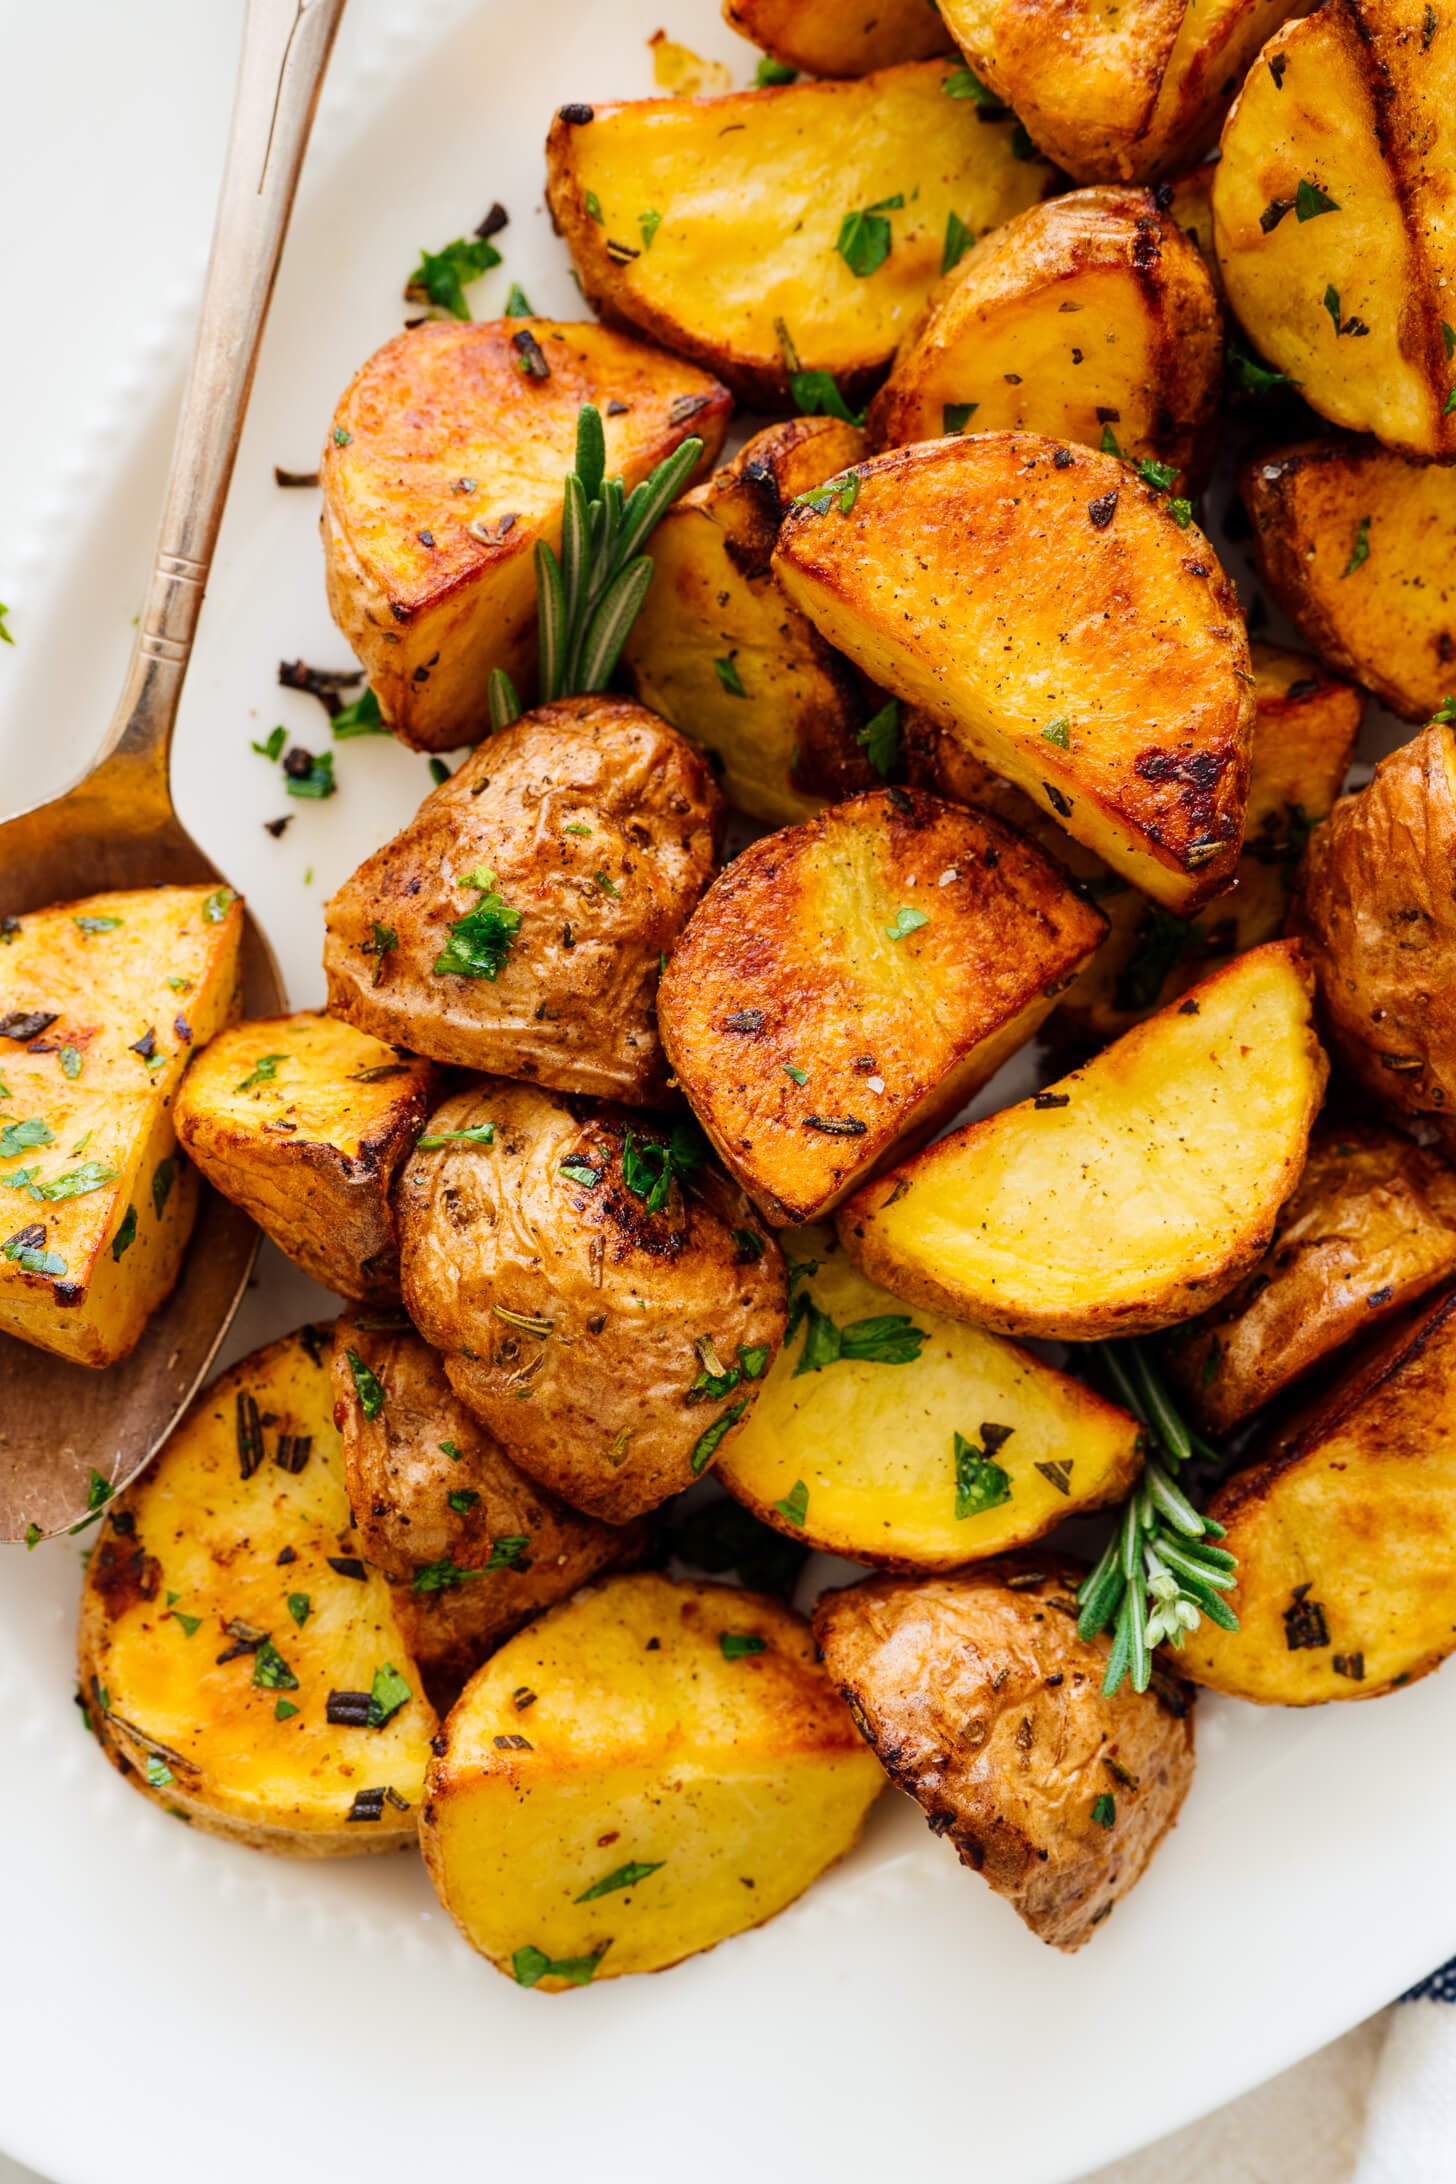 Grilled Potatoes With Rosemary